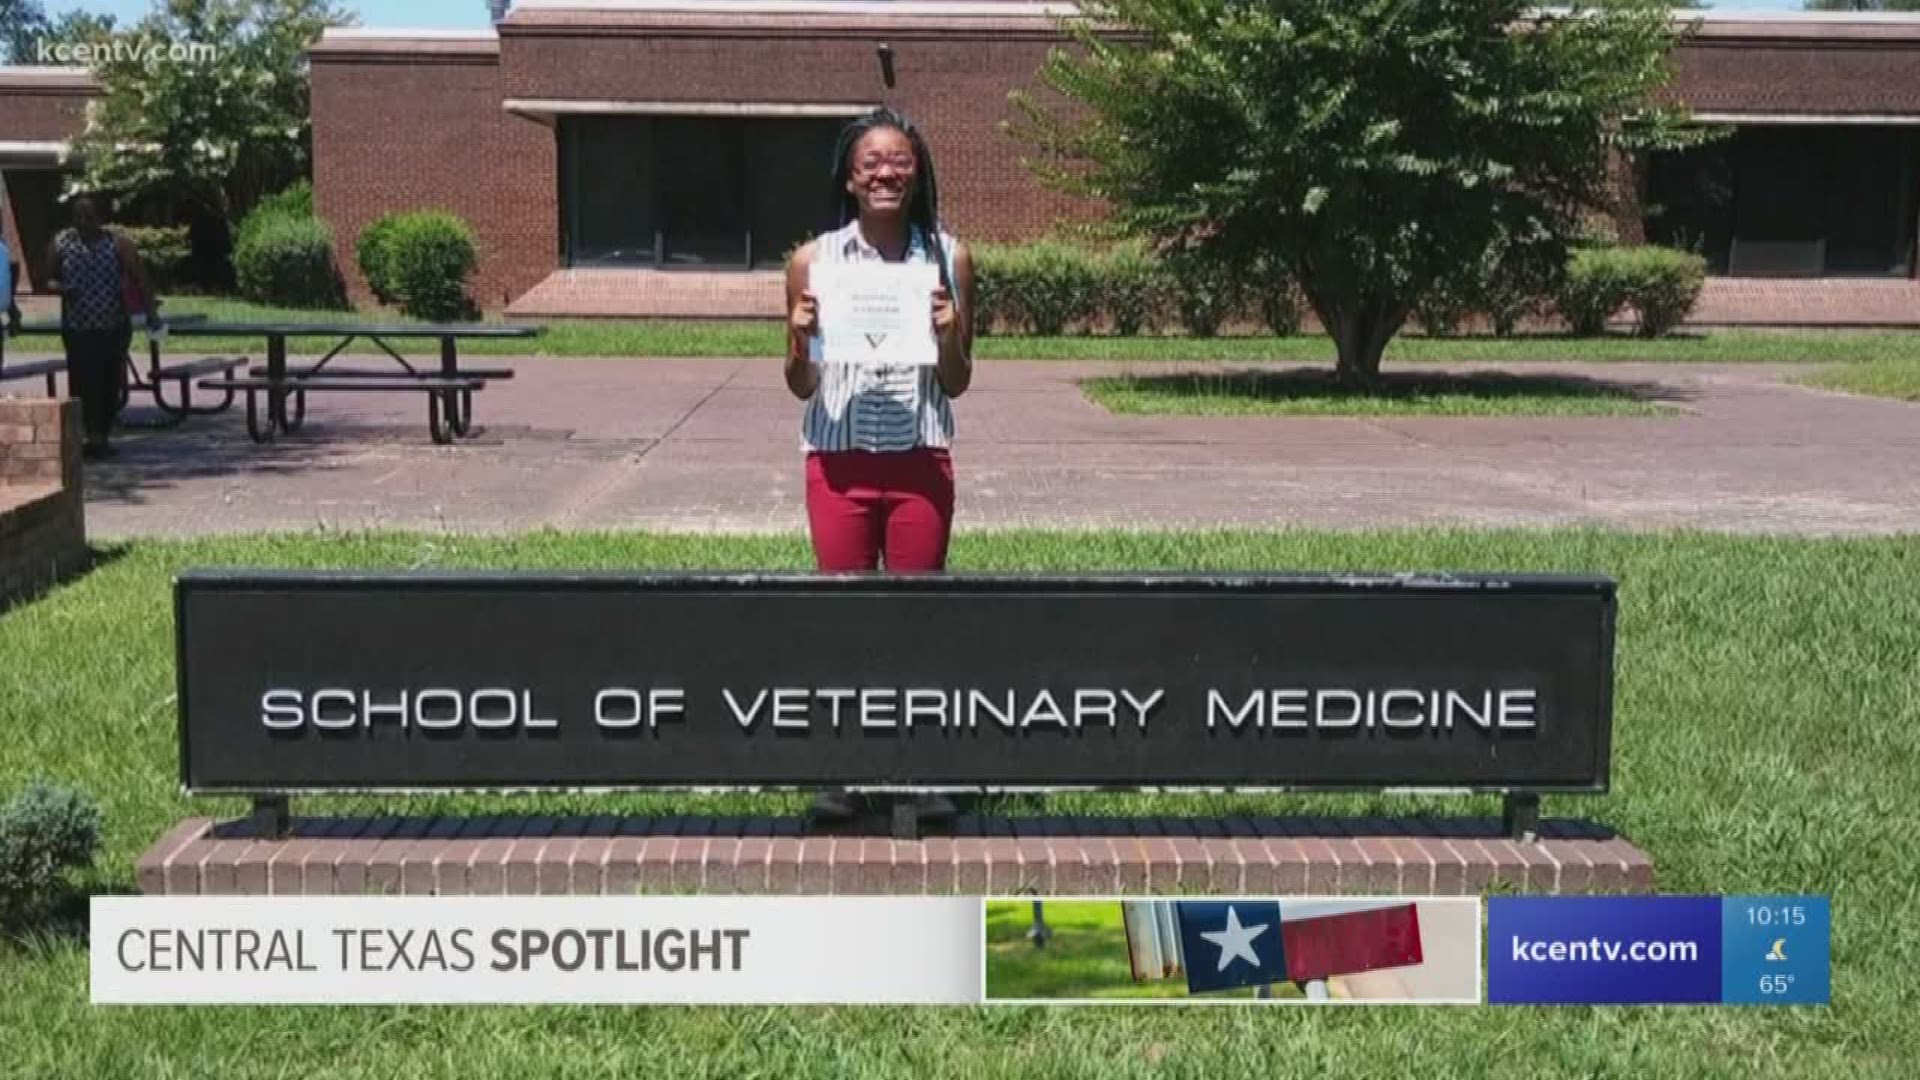 14-year-old Za'Kay-Rah Bar's goal? To become a zoologist.